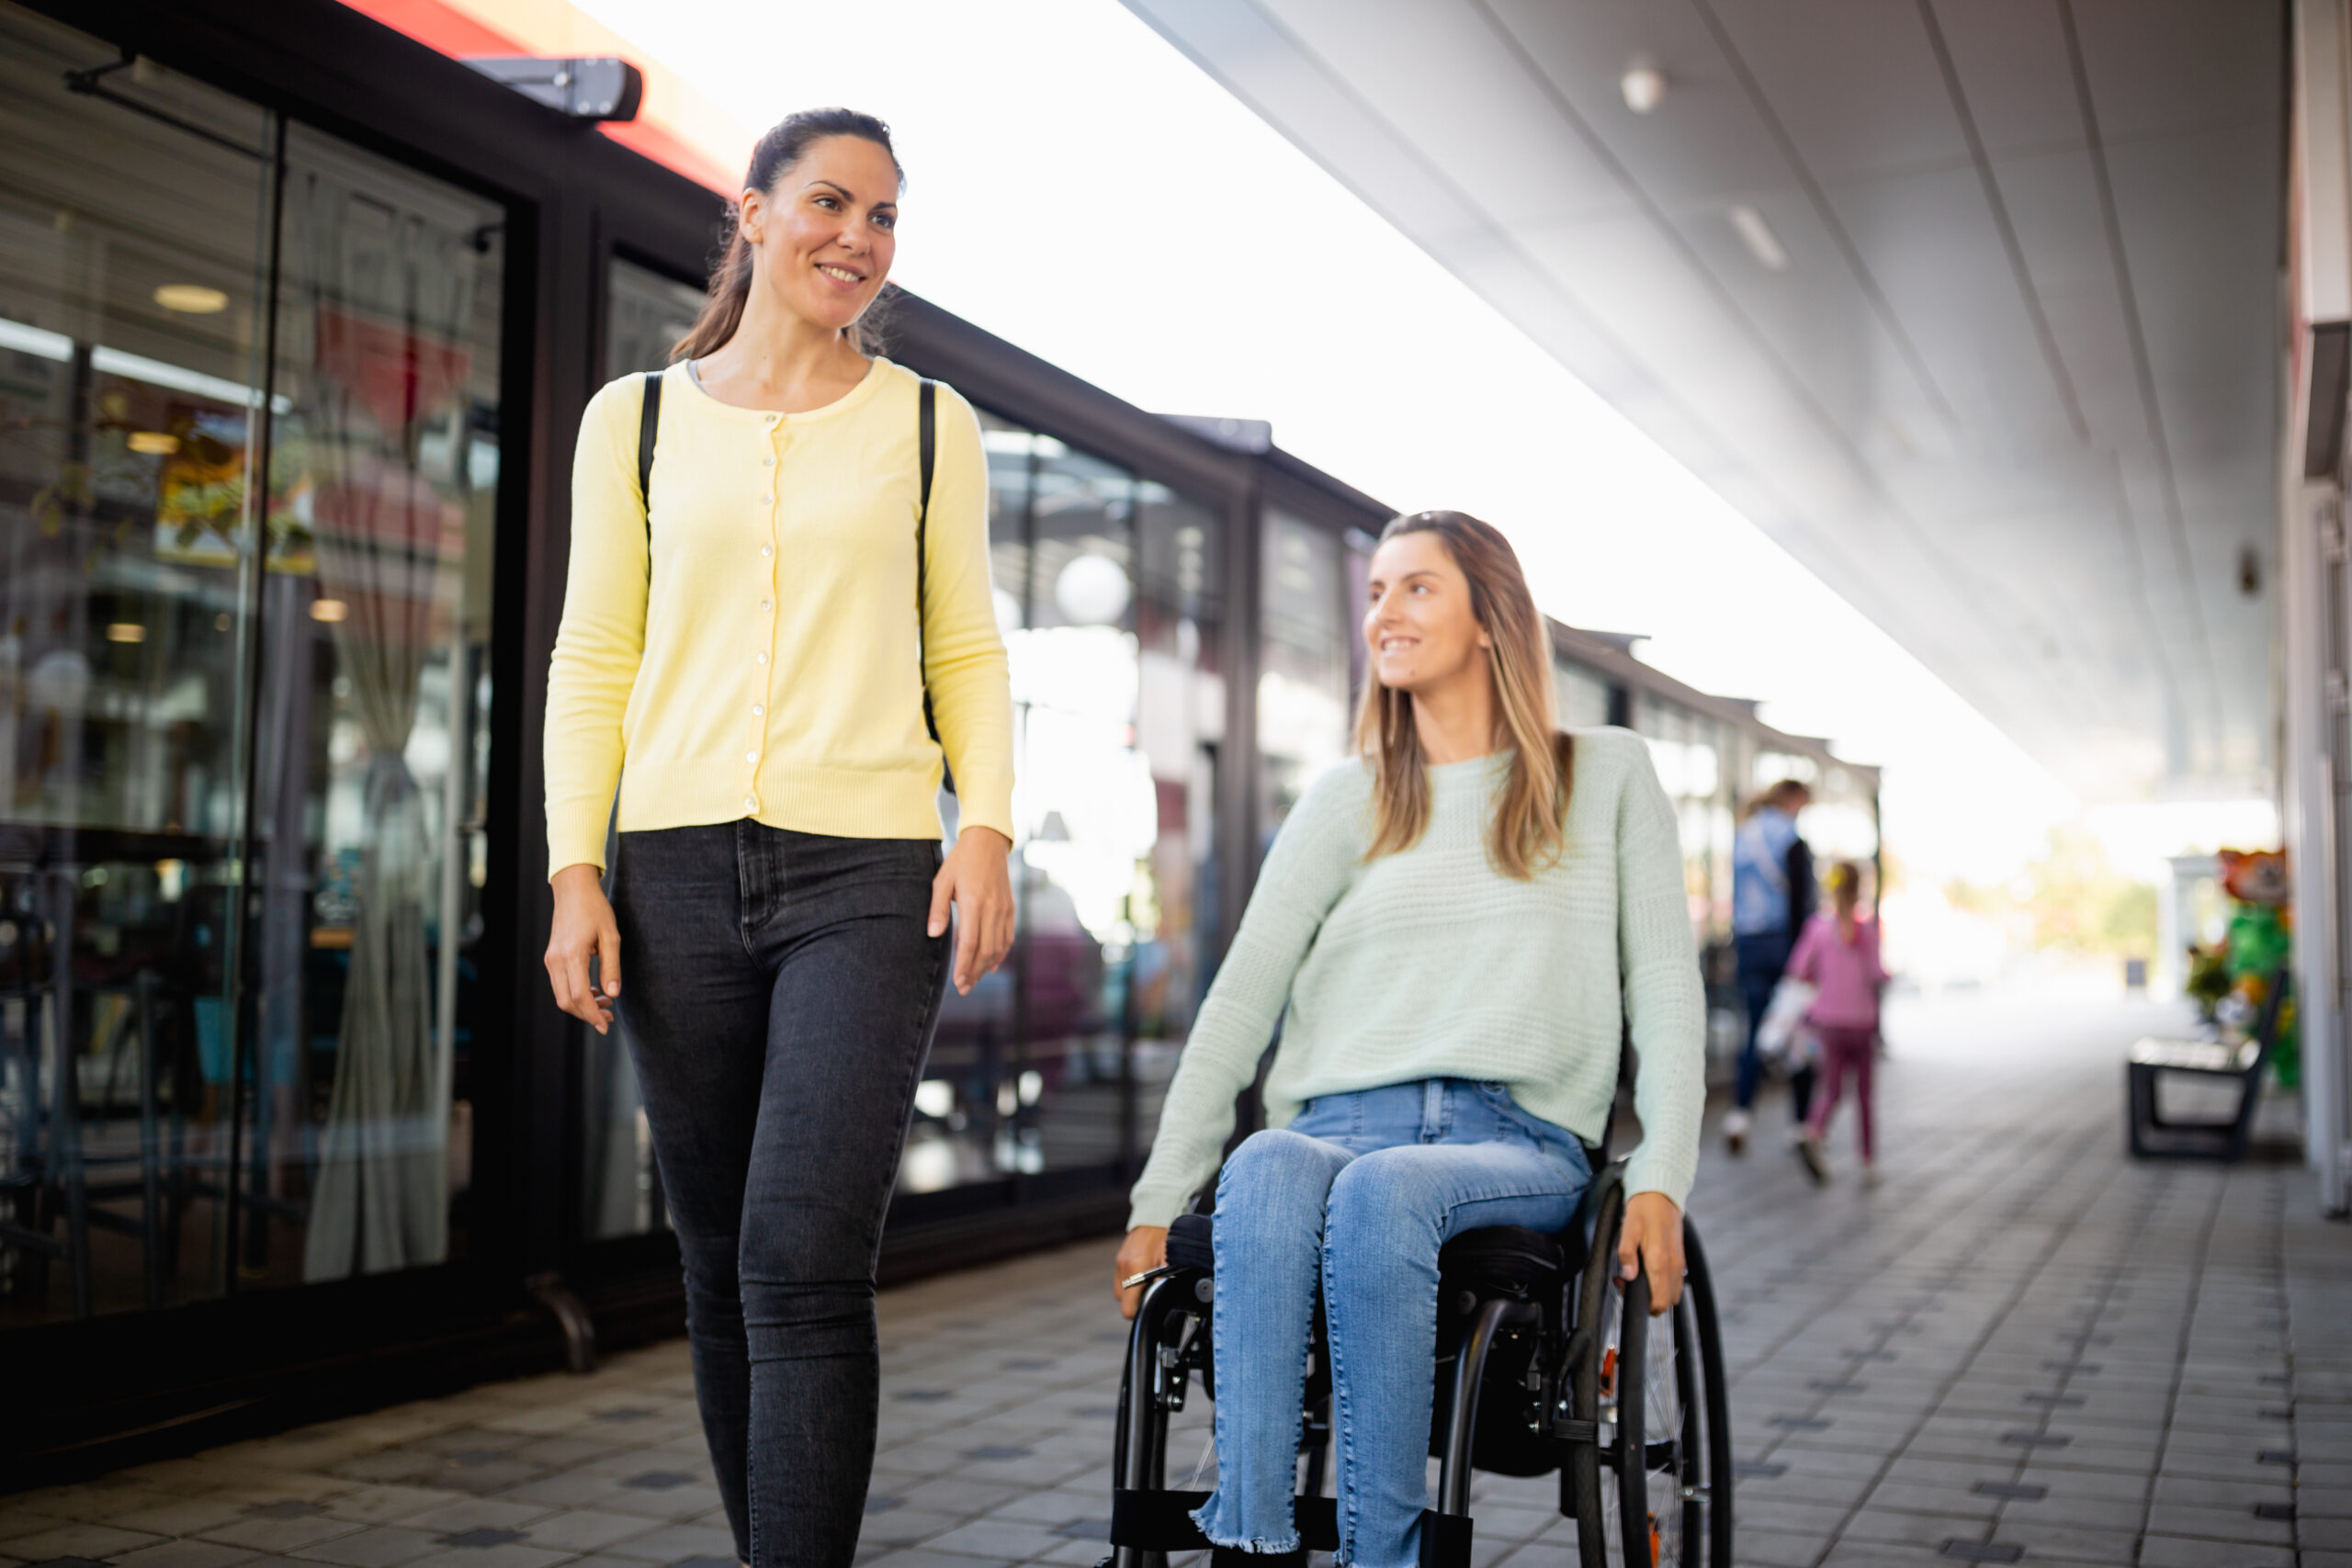 Two women shopping, one woman is using a wheelchair.